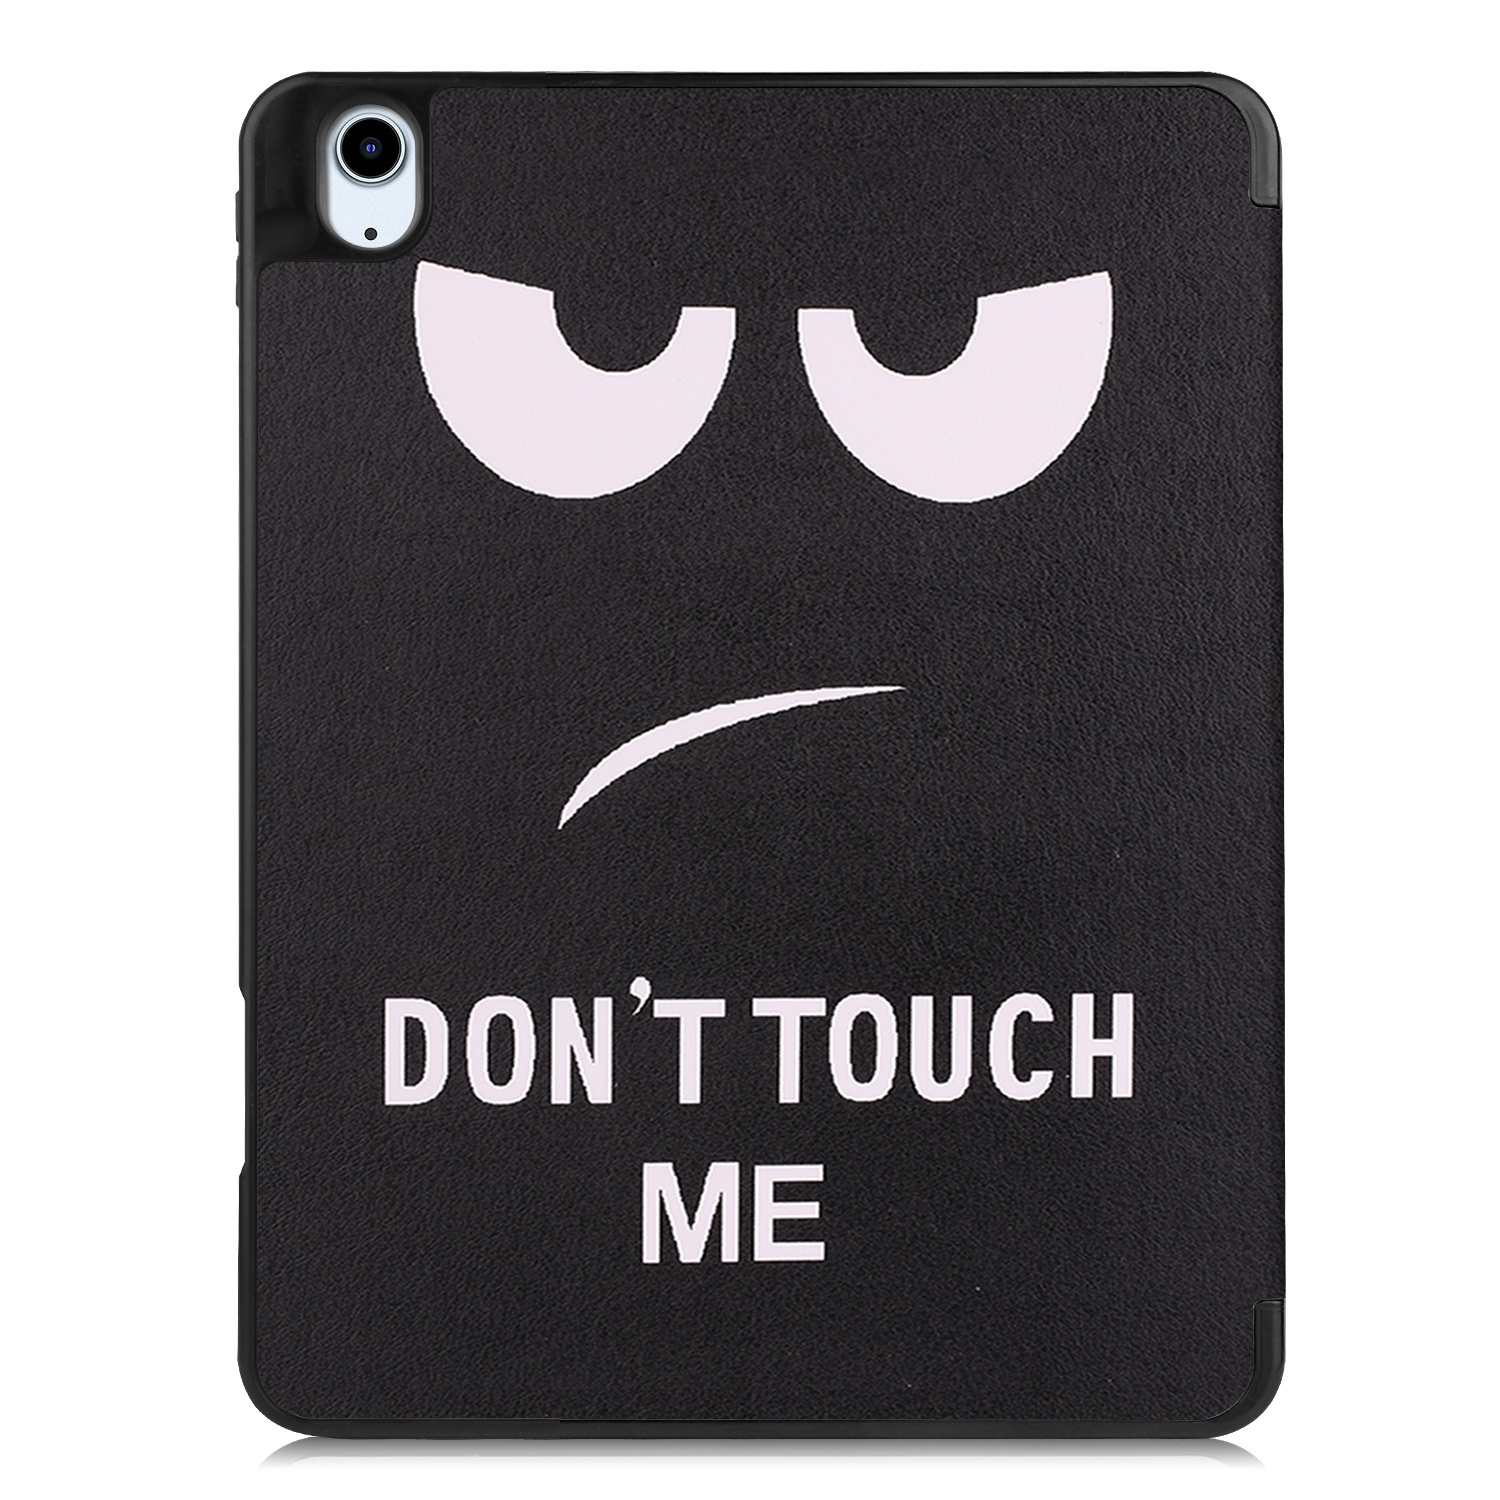 Nomfy iPad Air 5 2022 Hoesje Met Screenprotector Case Don't Touch Me - Hoes Met Uitsparing Apple Pencil - iPad Air 5 2022 Hoes Hardcover Hoesje Don't Touch Me Bookcase